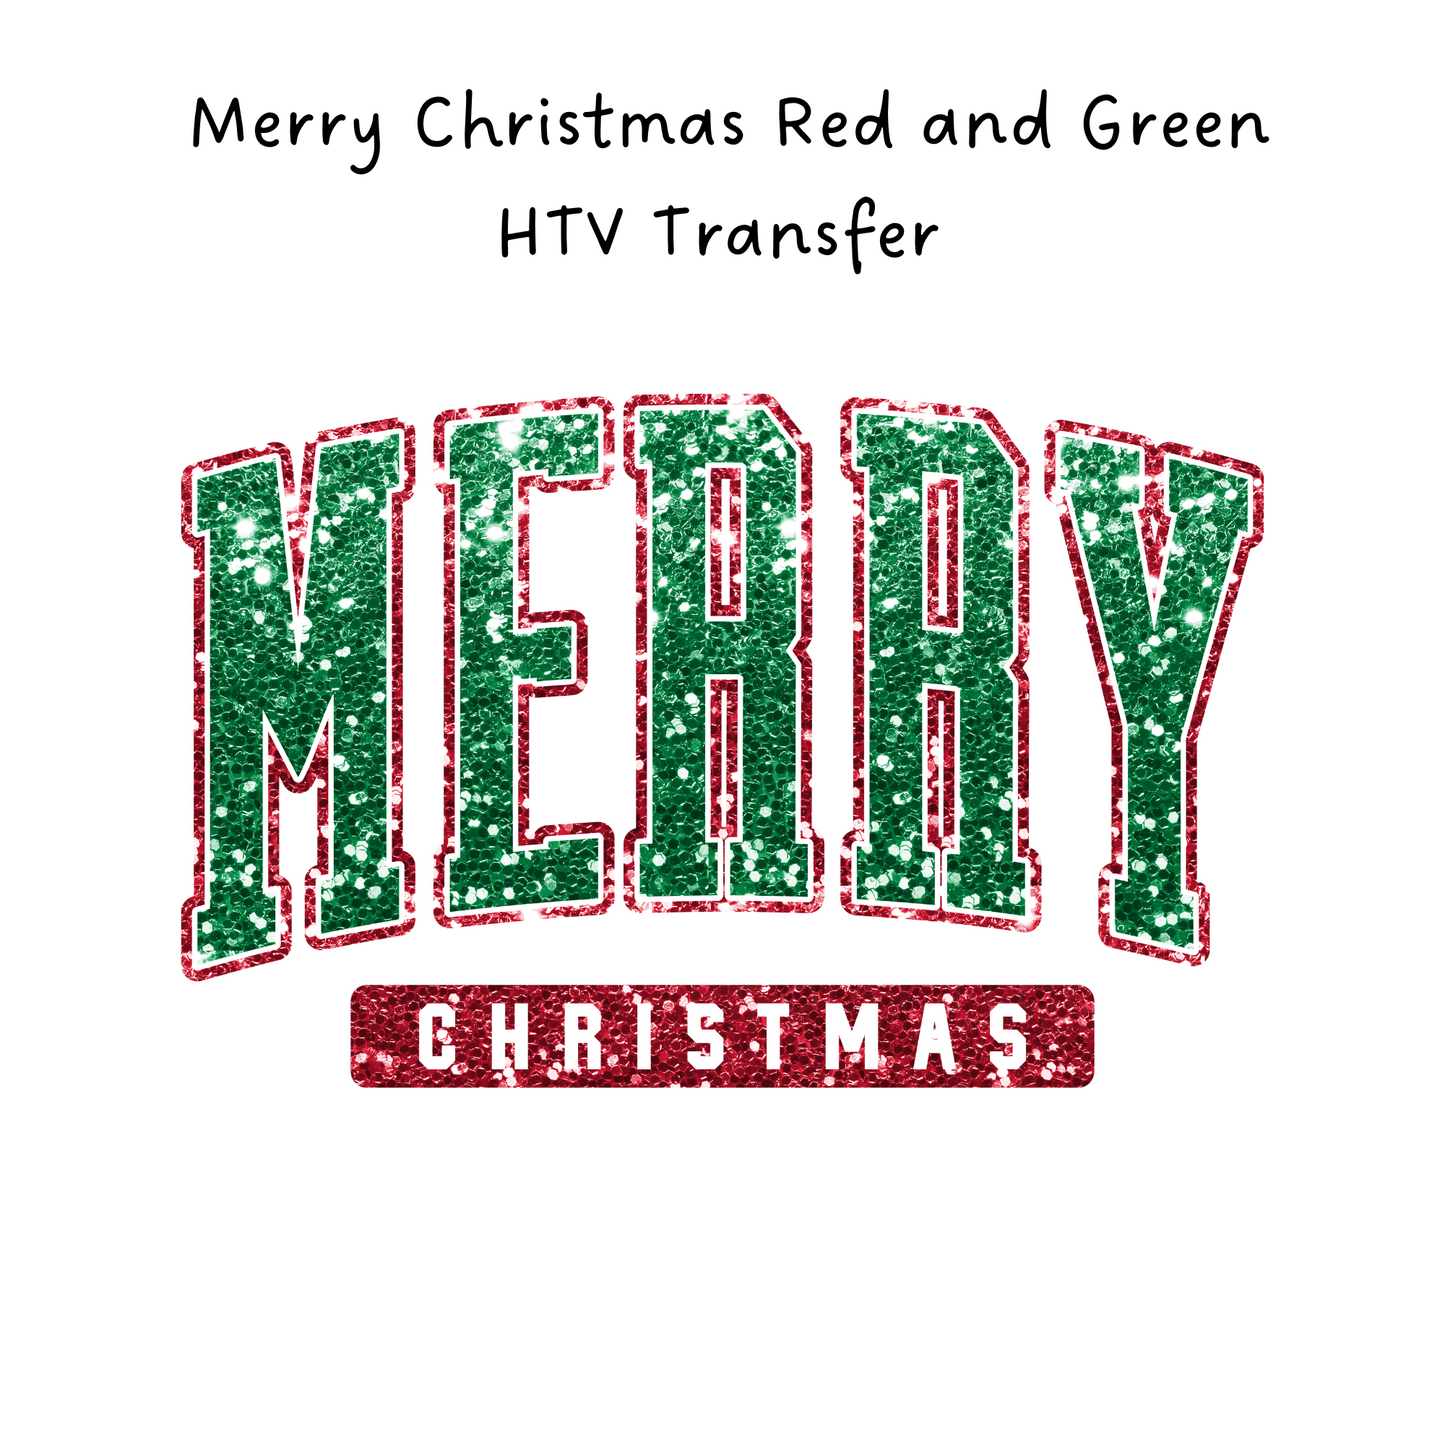 Merry Christmas Red and Green HTV Transfer